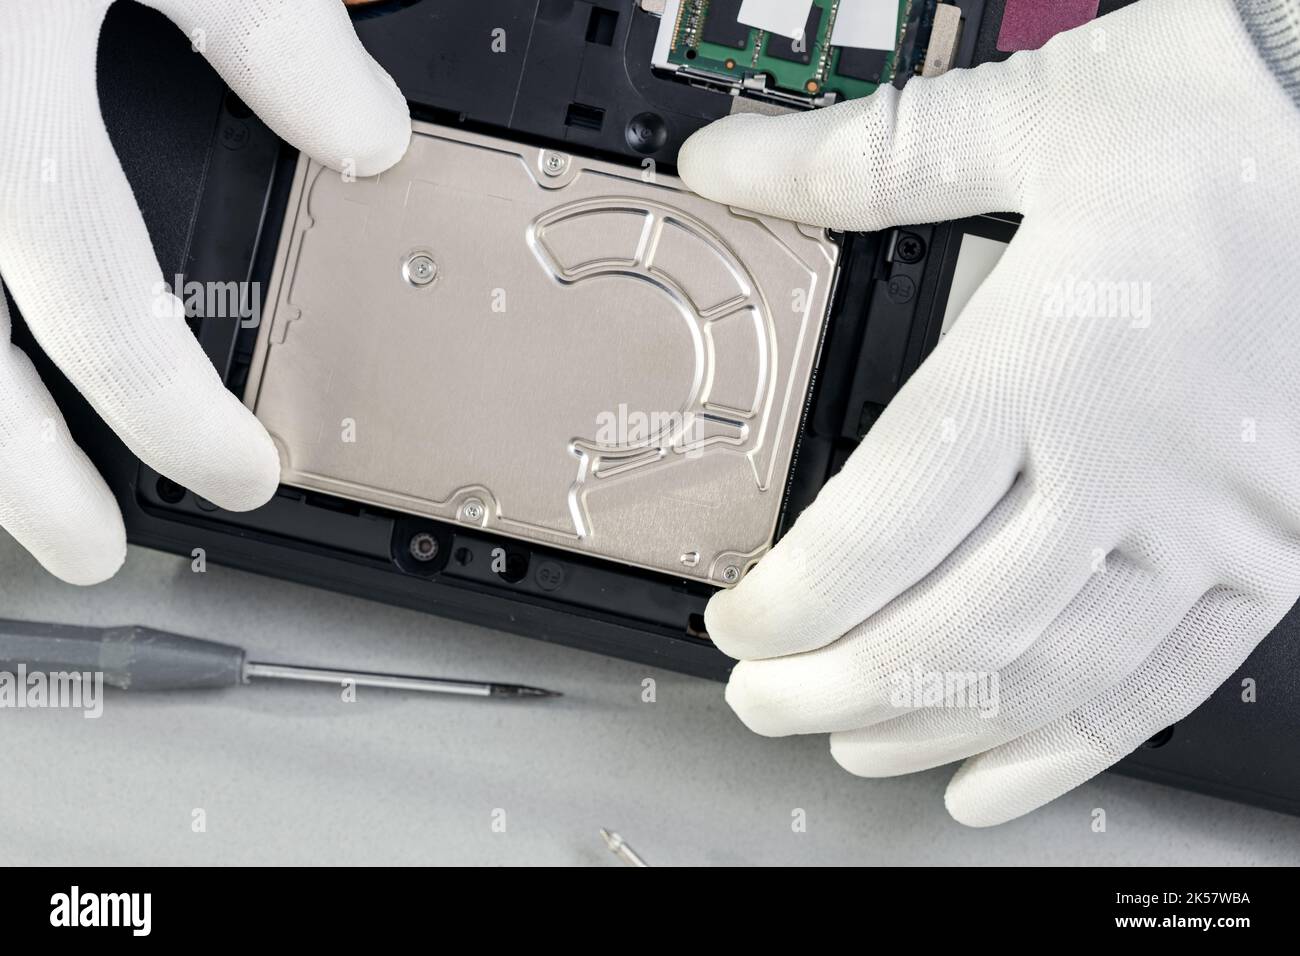 Technician hands removing an old mechanical hard disk from a laptop. Top view Stock Photo